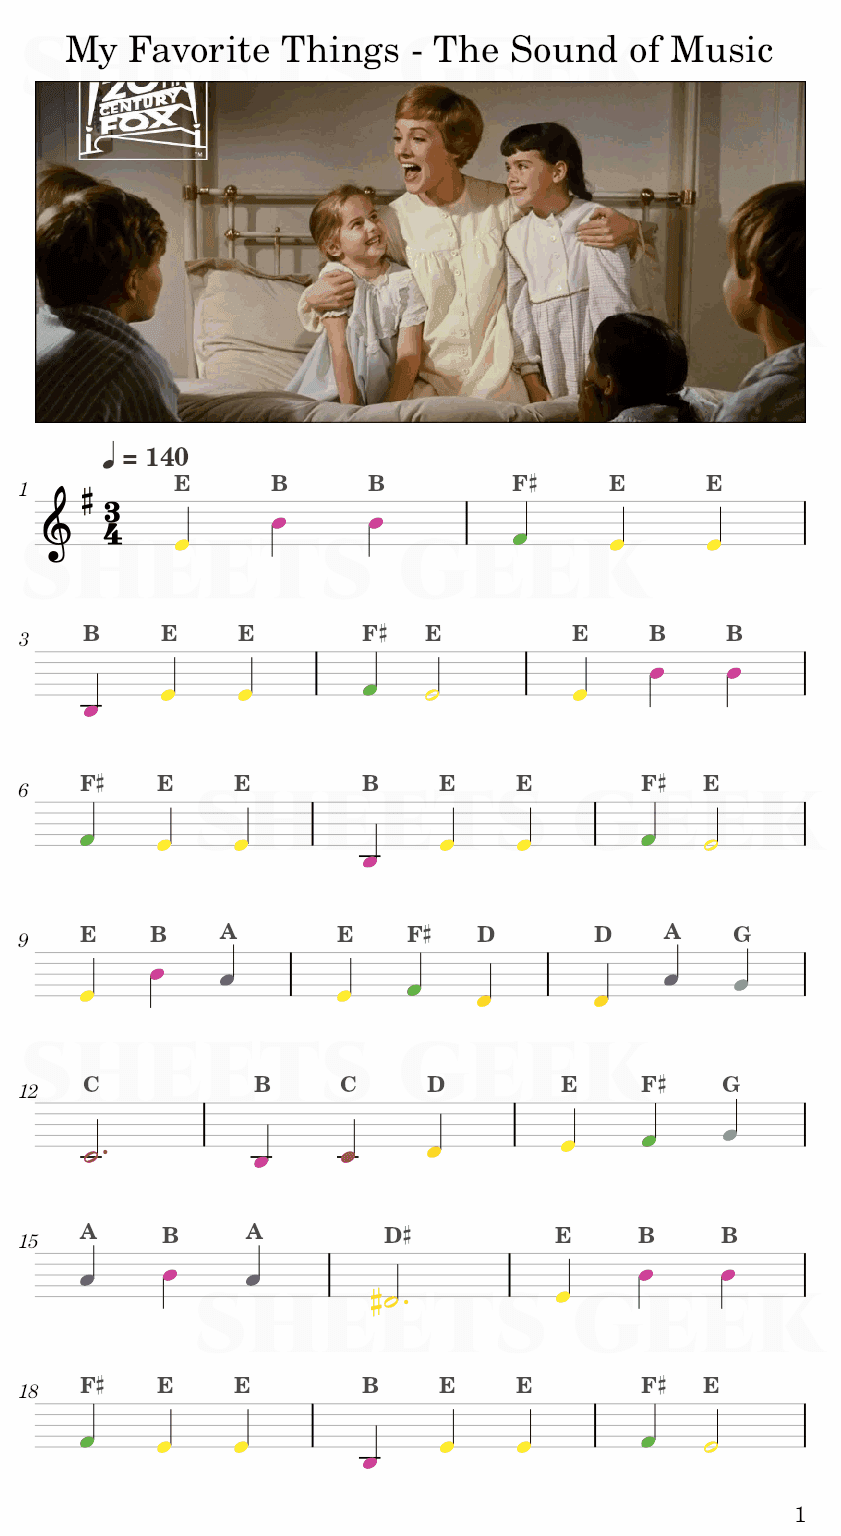 My Favorite Things - The Sound of Music Easy Sheet Music Free for piano, keyboard, flute, violin, sax, cello page 1